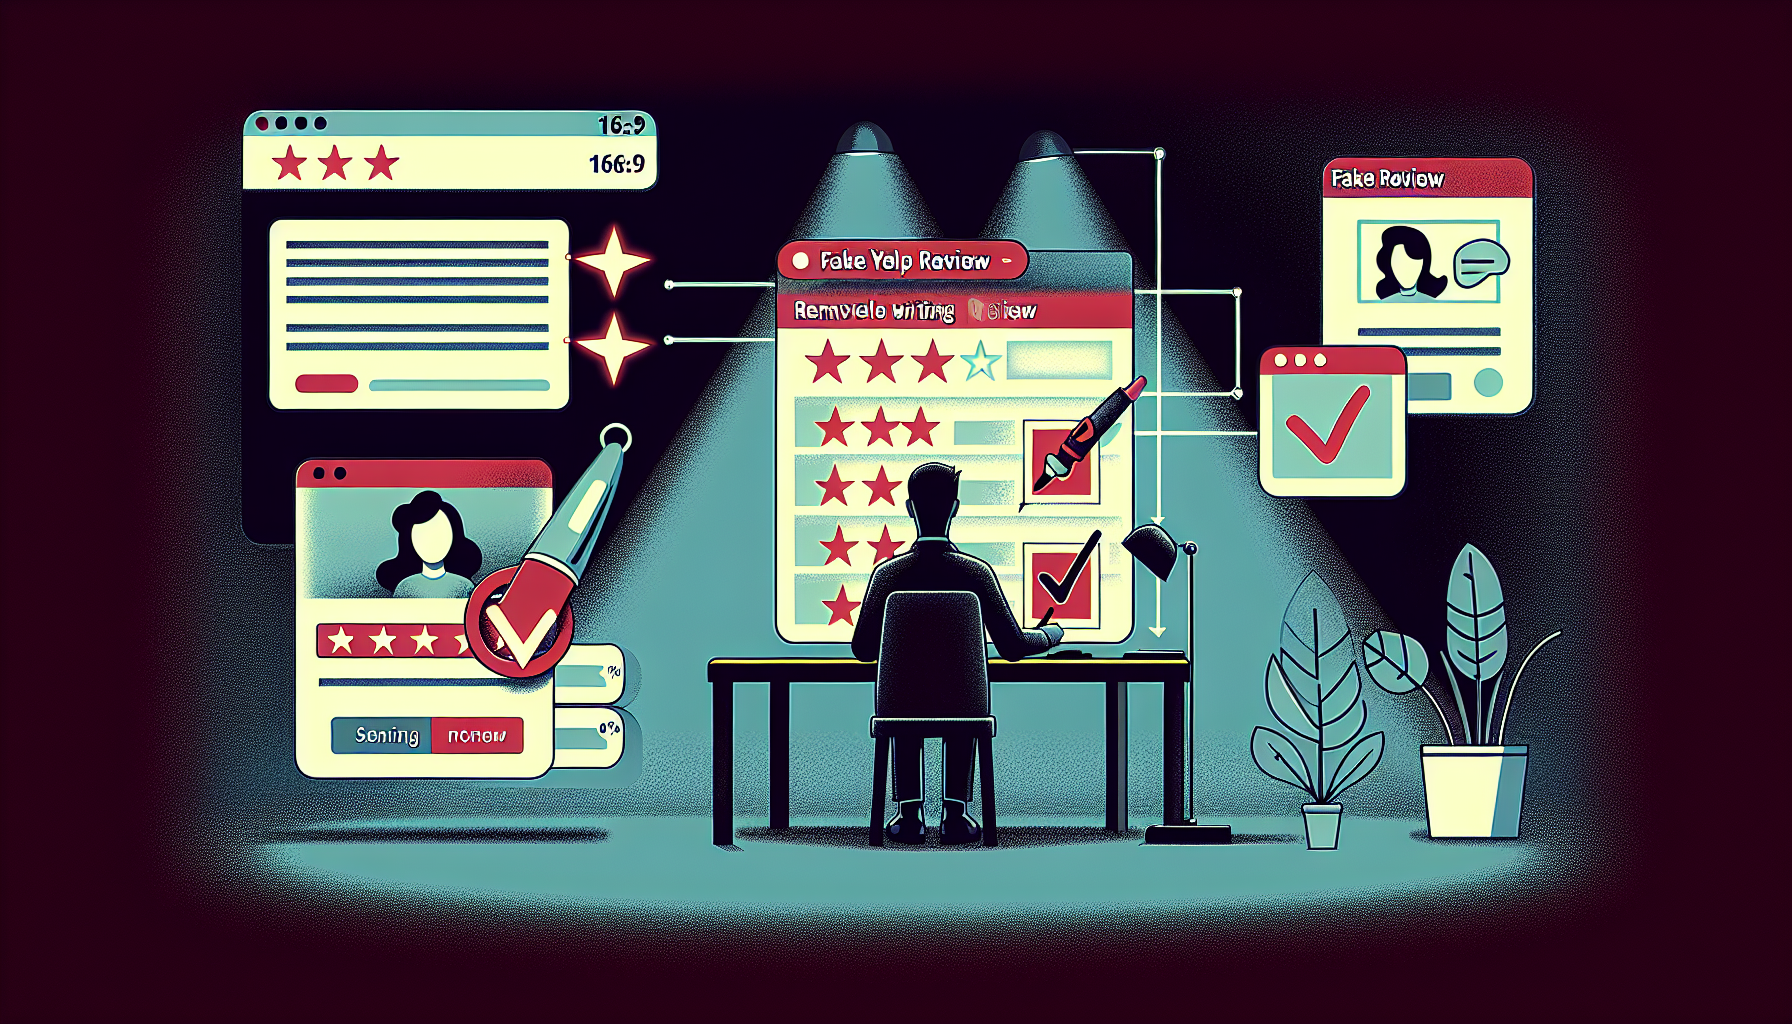 An illustrative and modern style image depicting the process of removing fake Yelp reviews. The image has an aspect ratio of 16:9 and is toned in accordance with the cinematic 60-30-10 color rule, with 10% of the image occupied by a strong primary color. The scene starts with a person writing a dishonest review on a screen, progresses through the platform identifying the fraudulent act, and culminates with the fake review being removed.